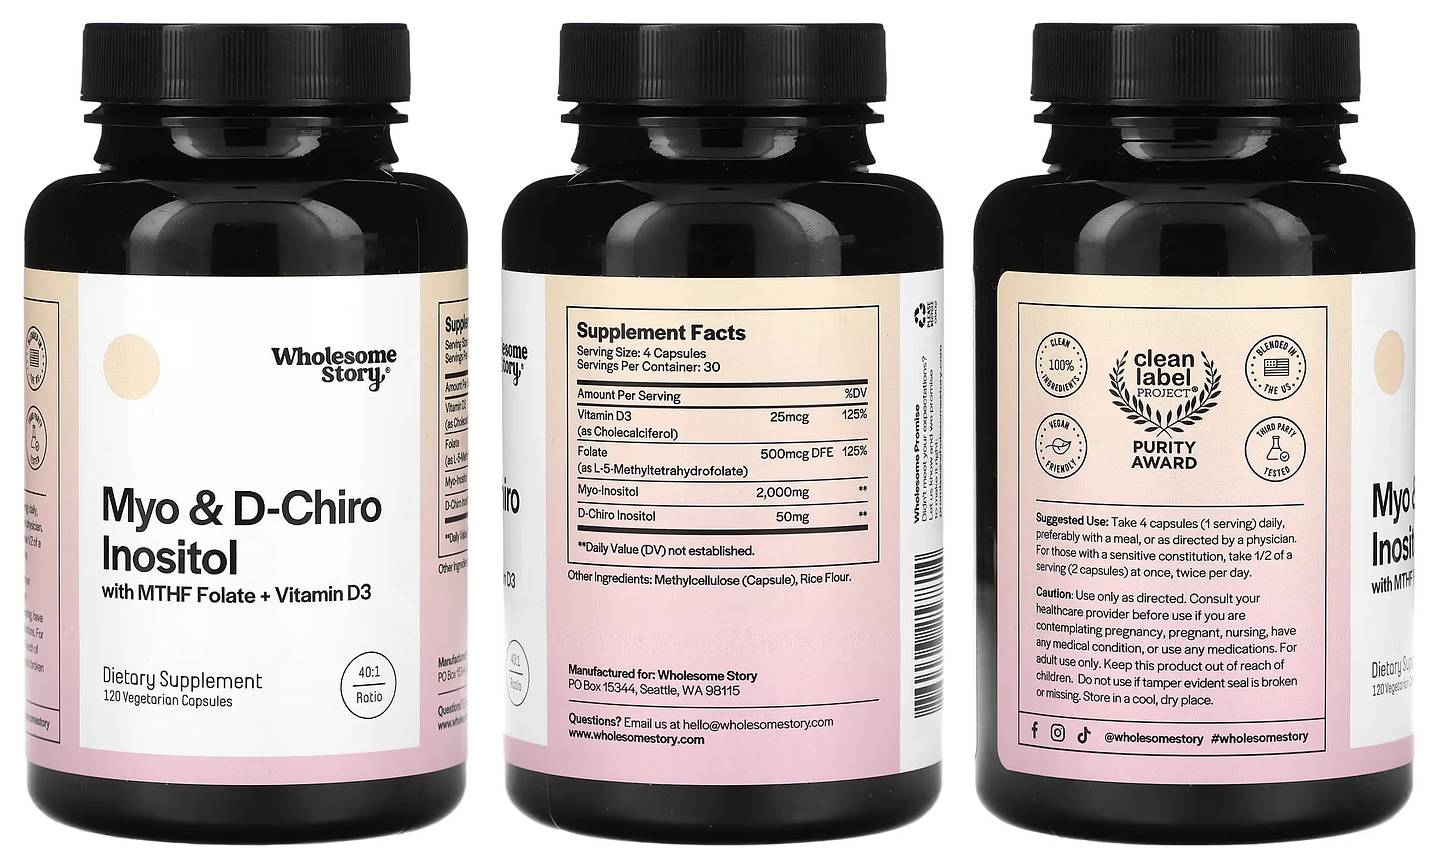 Wholesome Story, Myo & D-Chiro Inositol with MTHF Folate + Vitamin D3 packaging